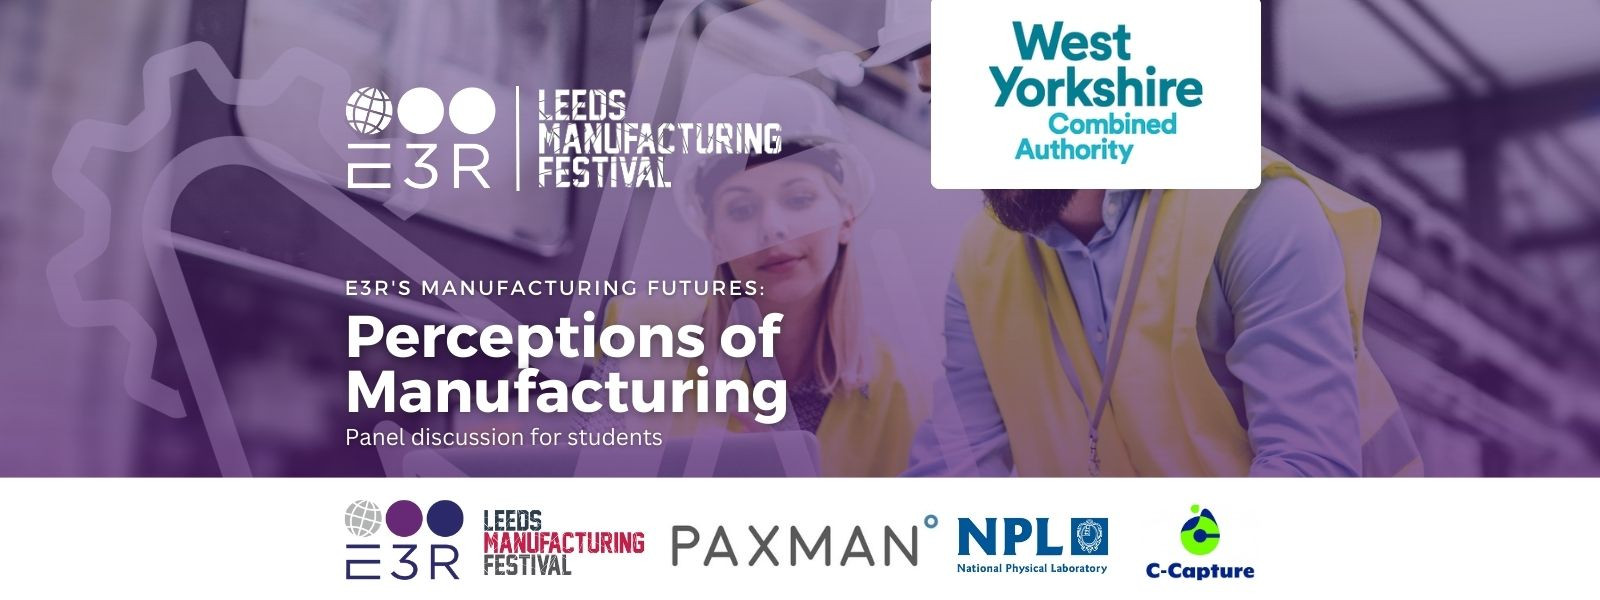 Exploring the perceptions of Manufacturing: E3 Recruitment's Webinar with West Yorkshire Combined Authority